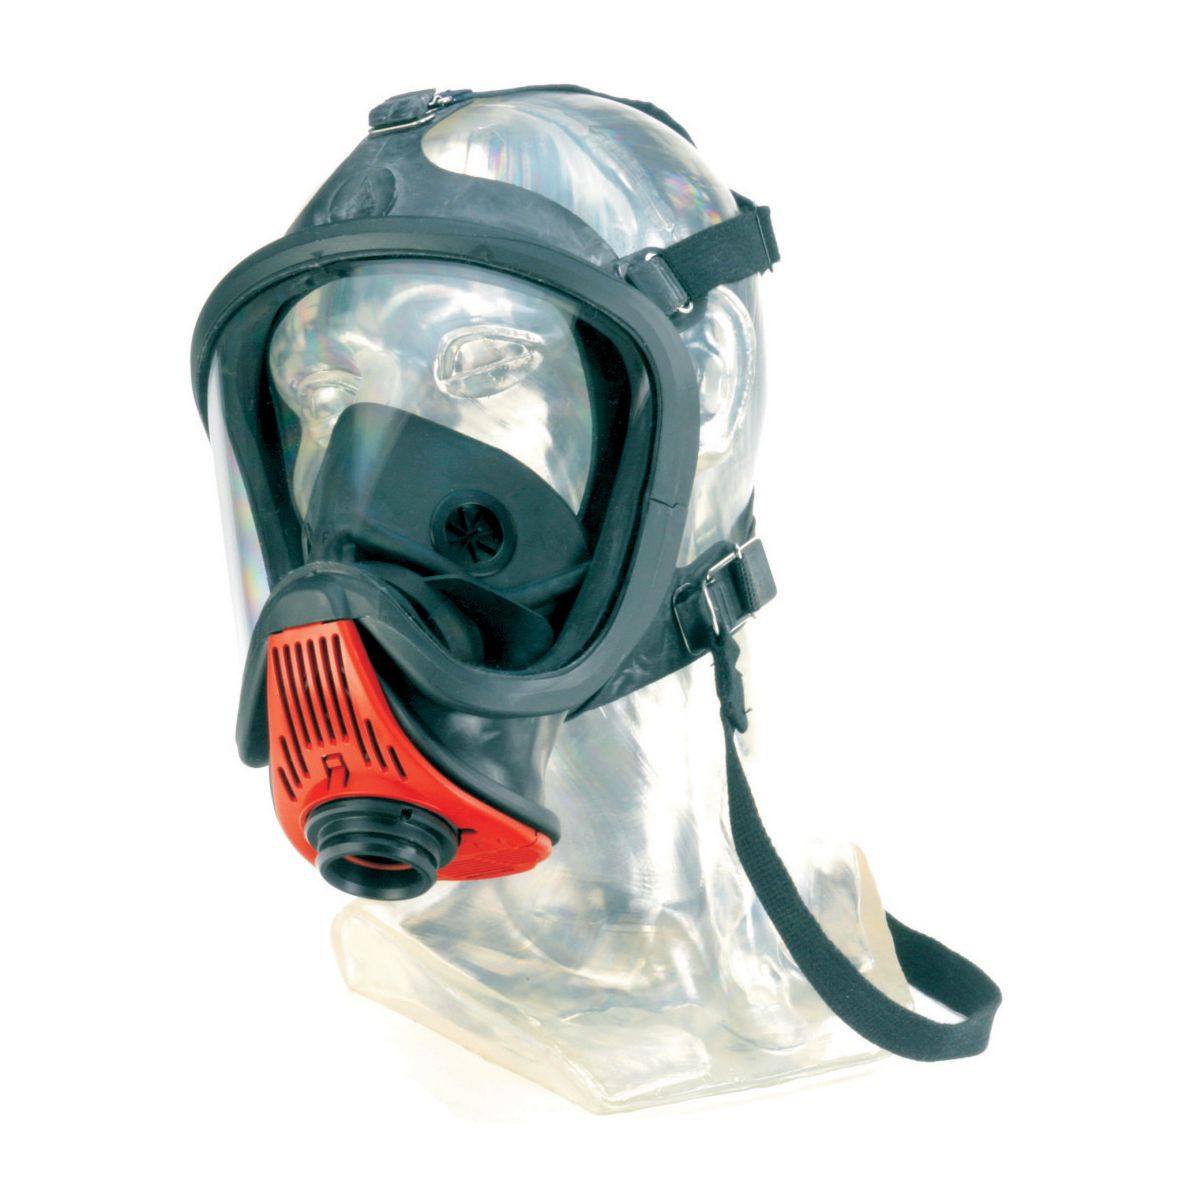 MSA Ultra Elite PS, rubber full-face mask for positive pressure with MSA plug-in connection, unisize